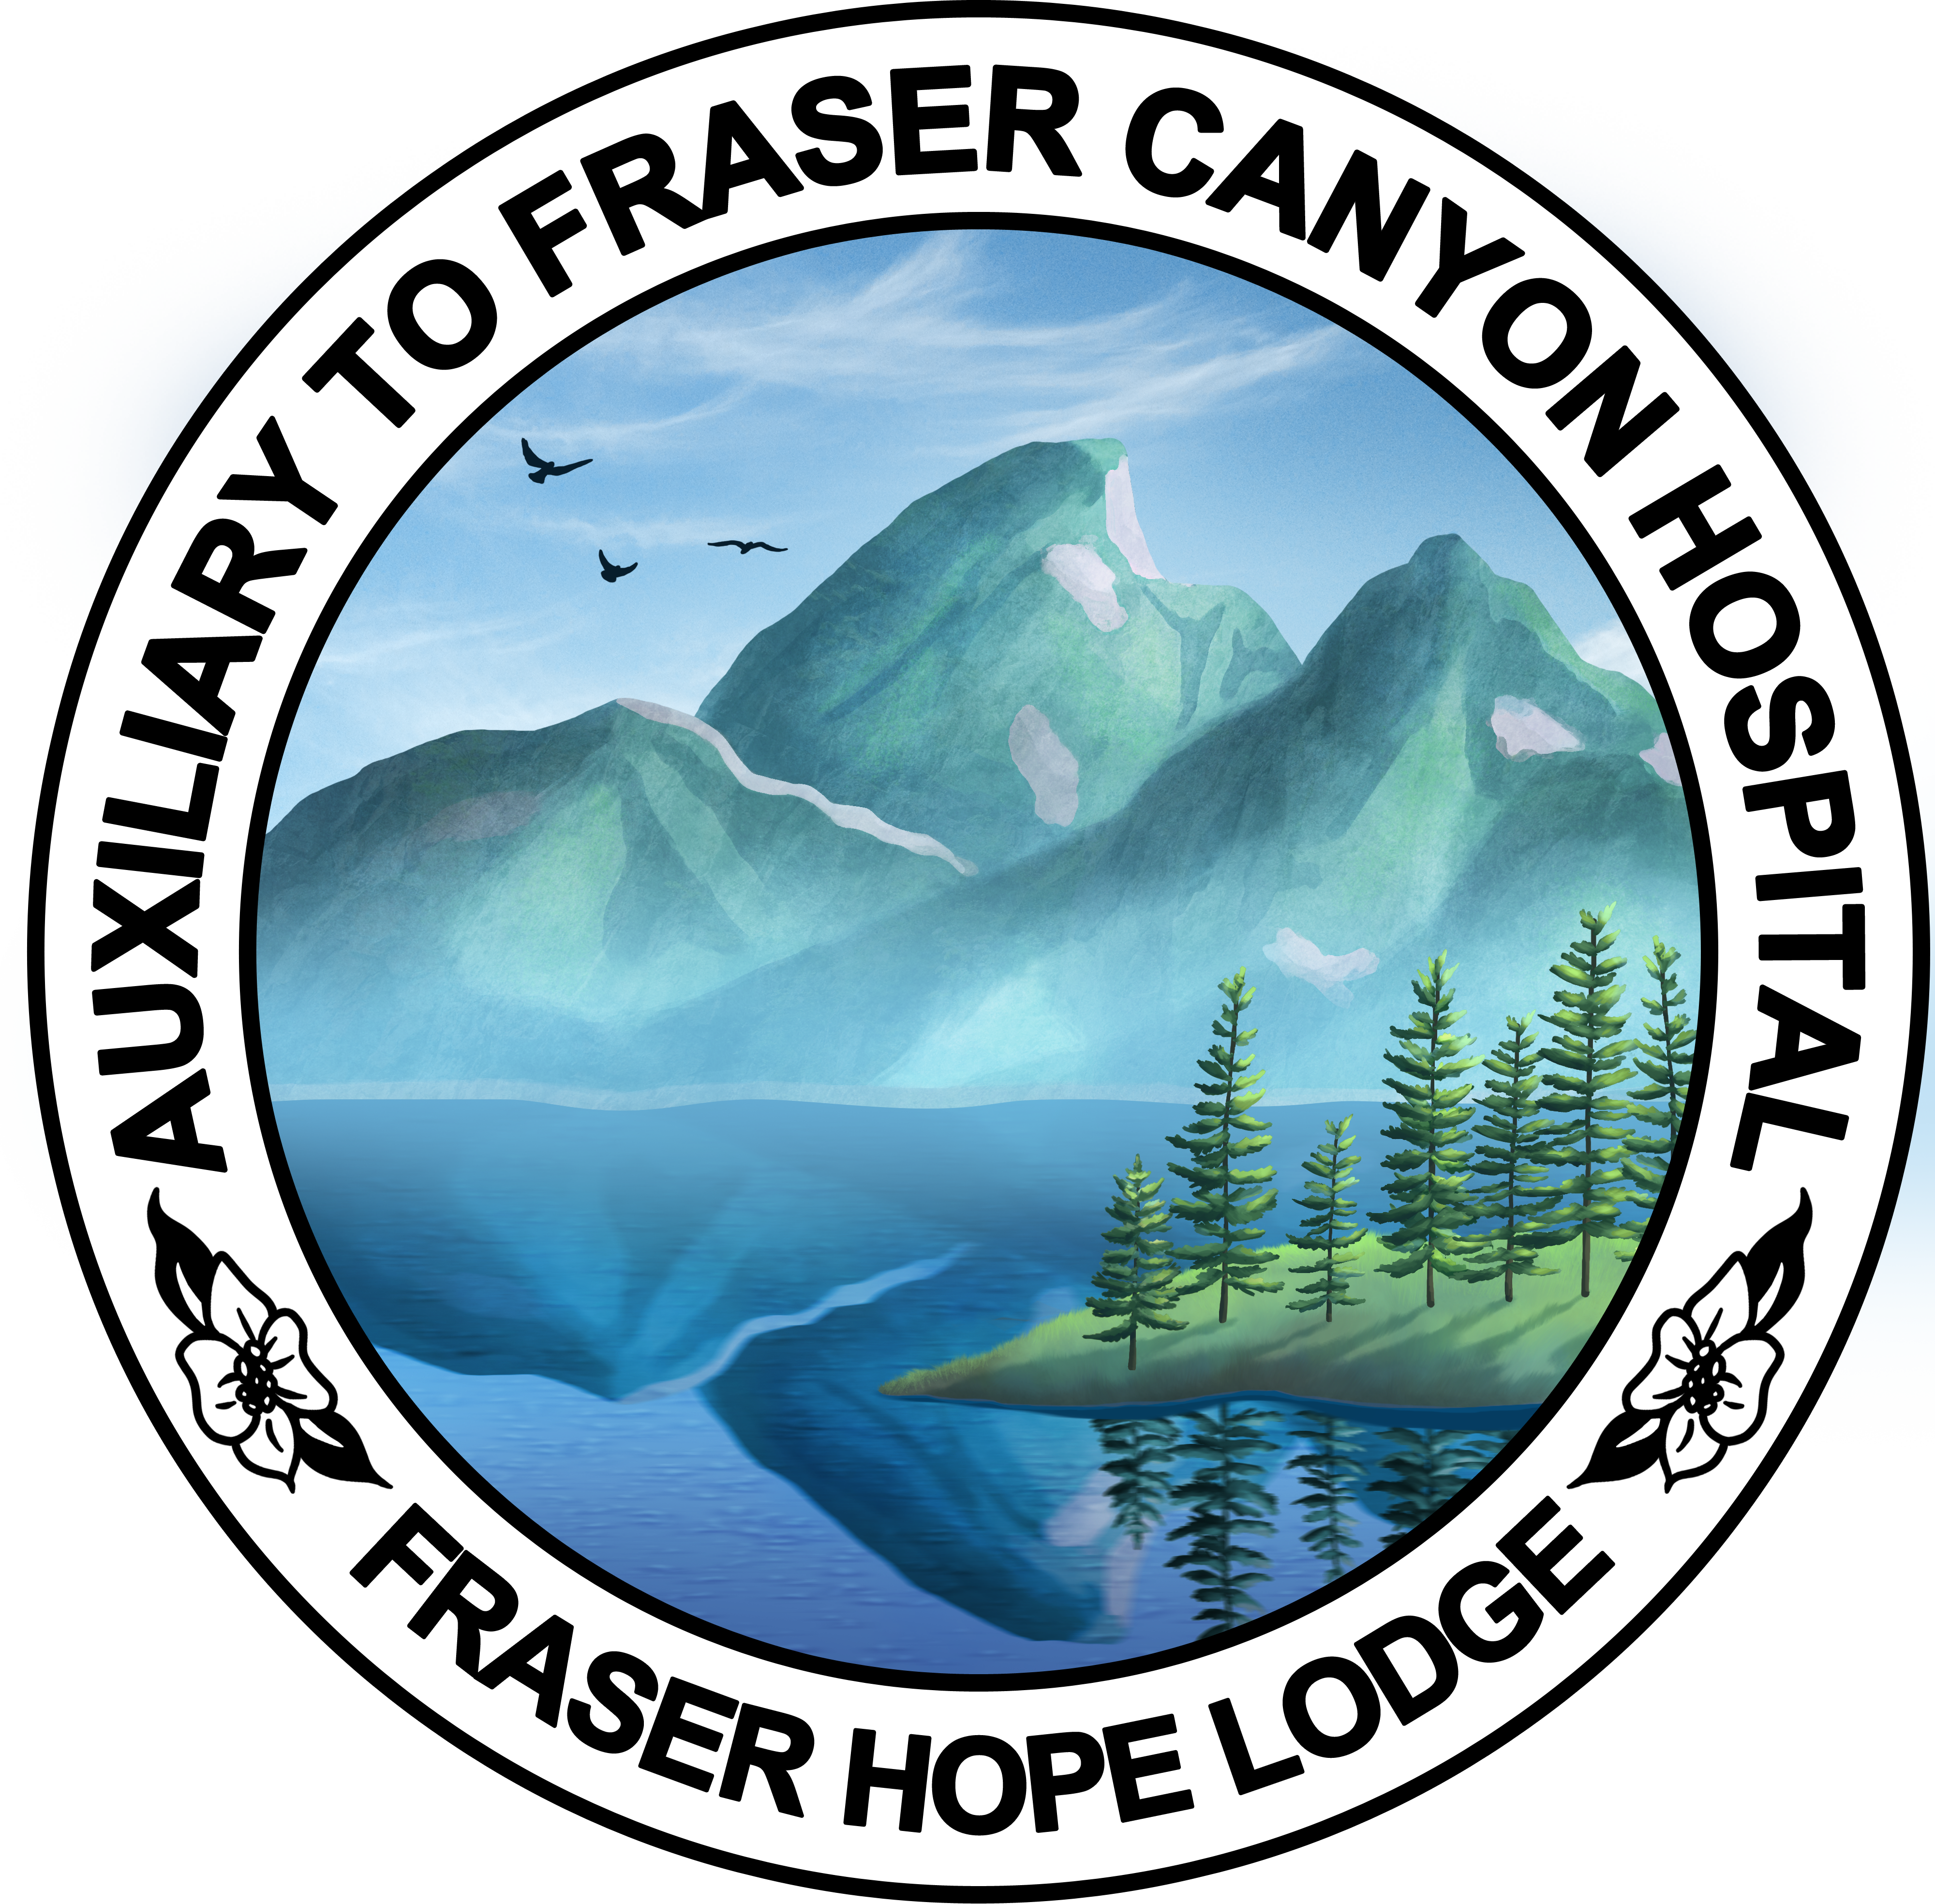 Auxiliary To Fraser Canyon Hospital & Fraser Hope Lodge